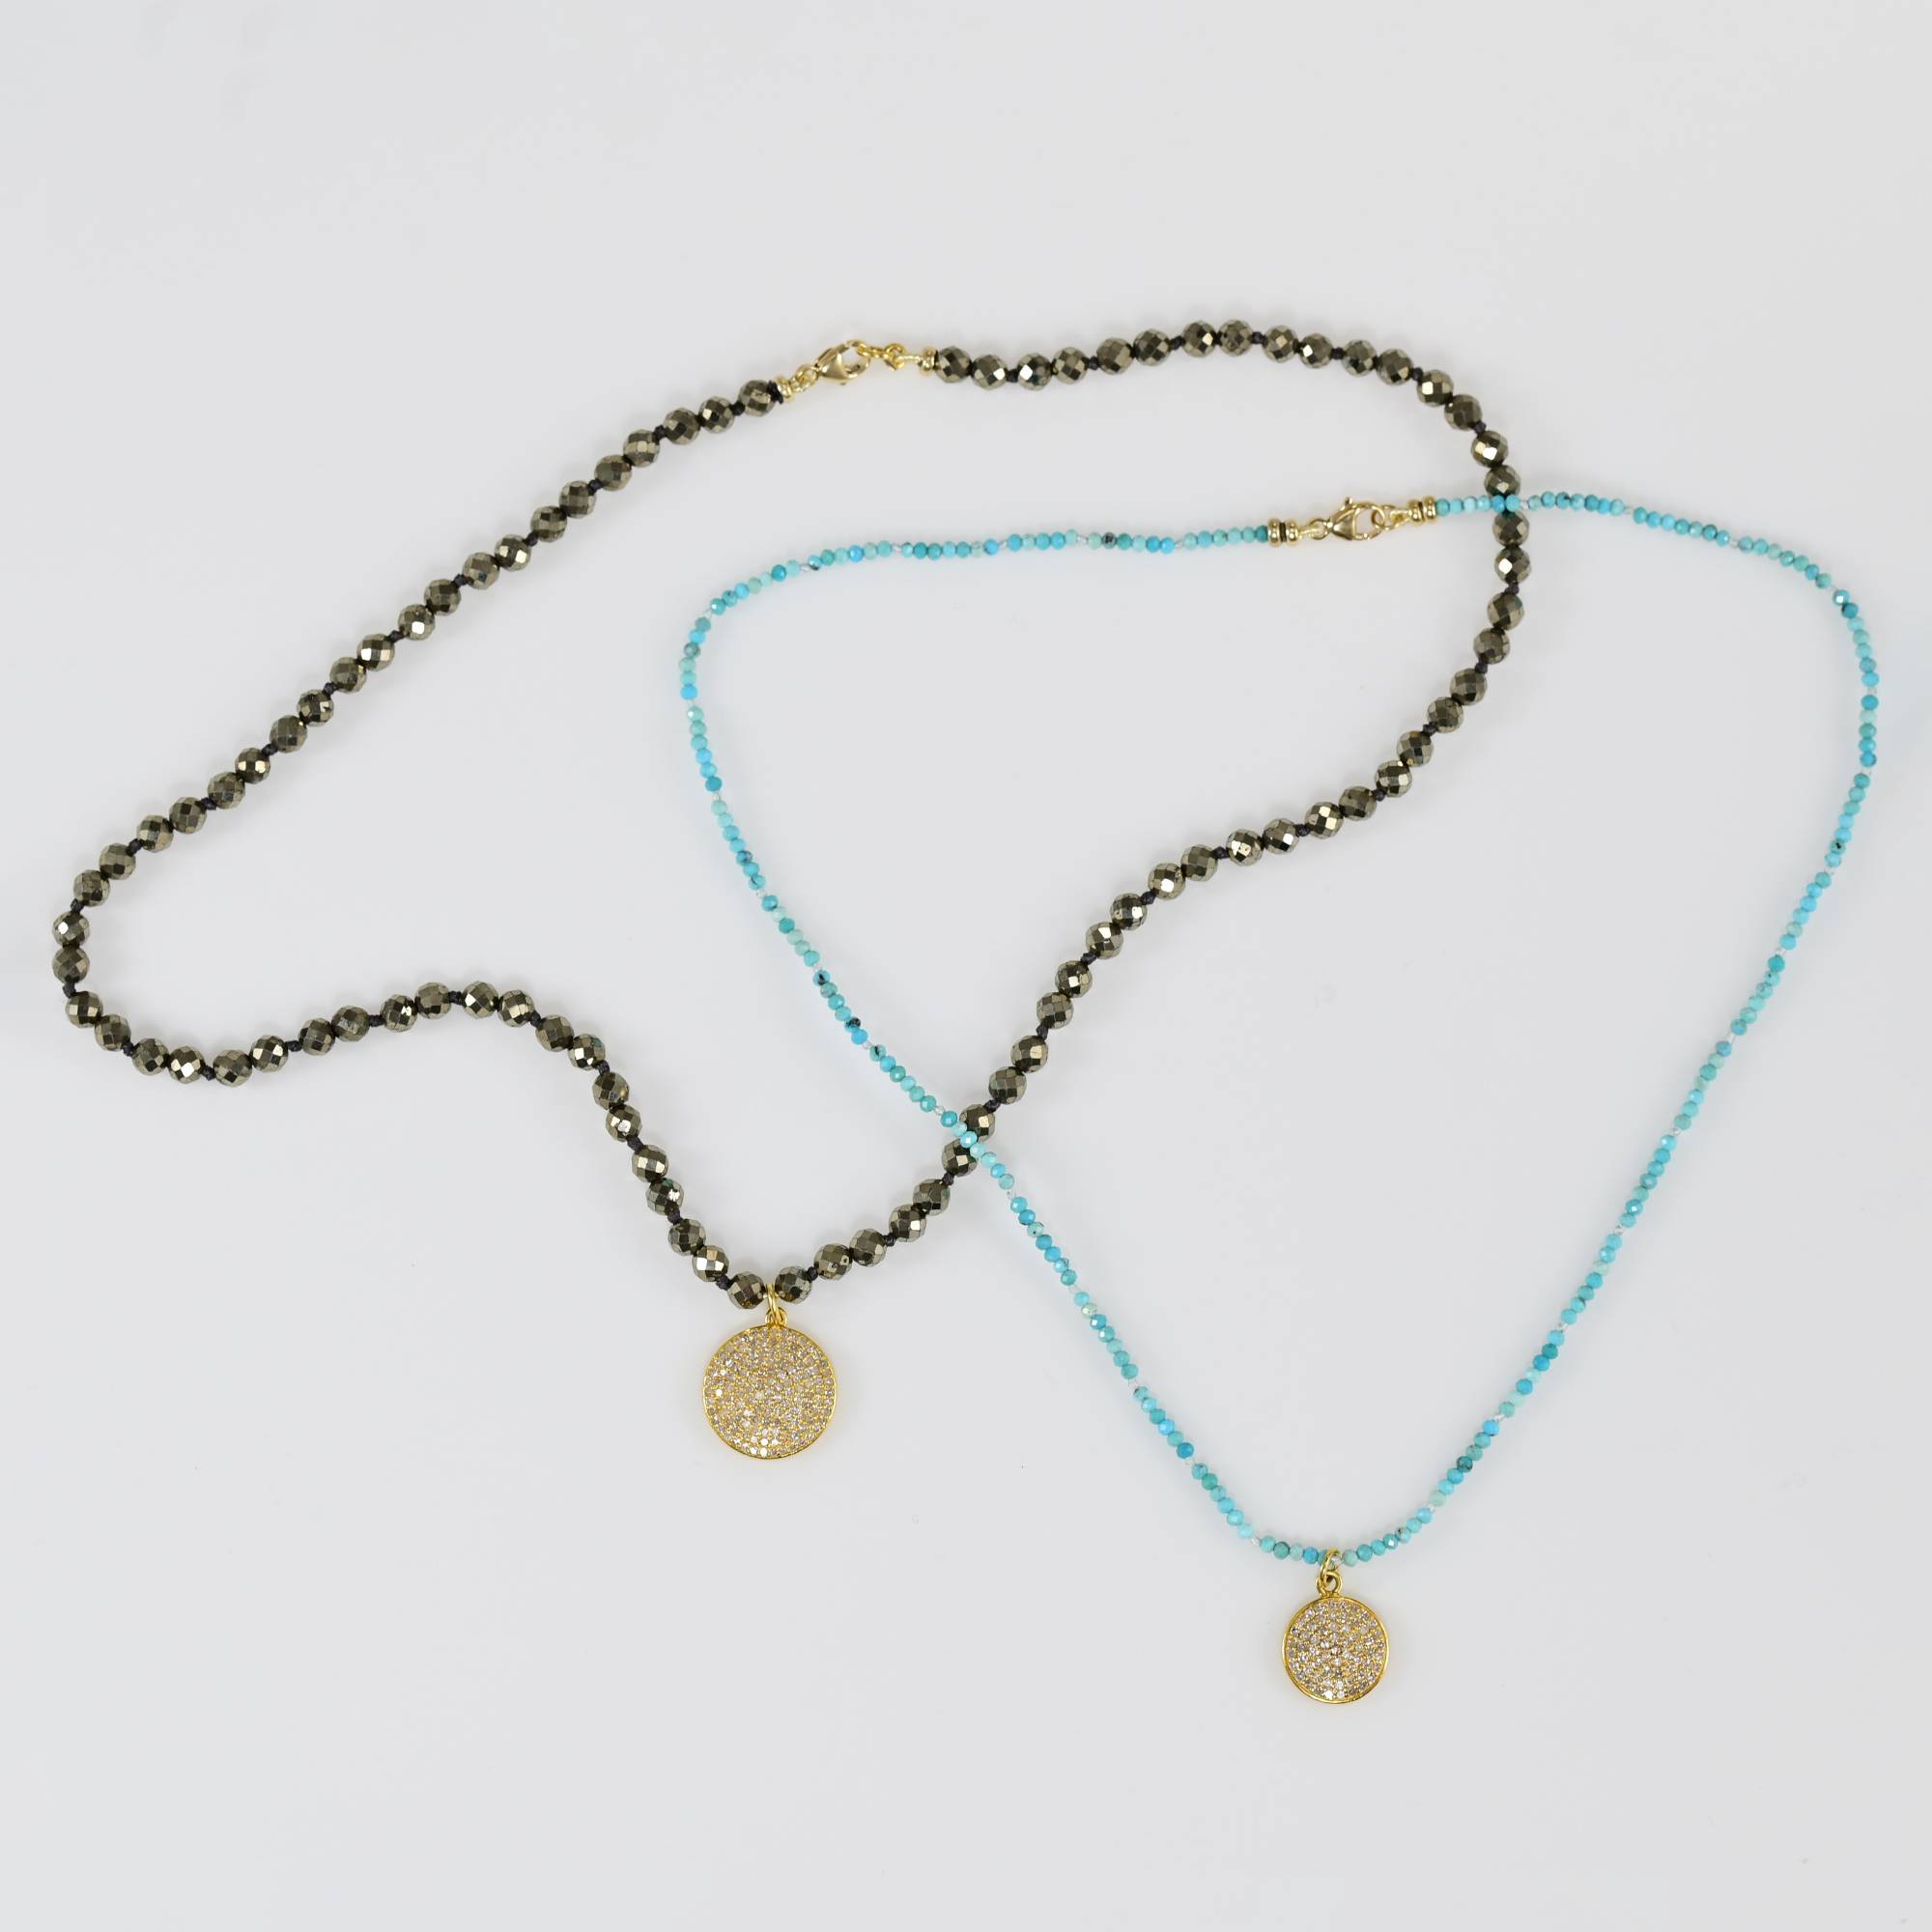 Delicate necklaces,Pyrite,Turquoise,Diamonds and gold